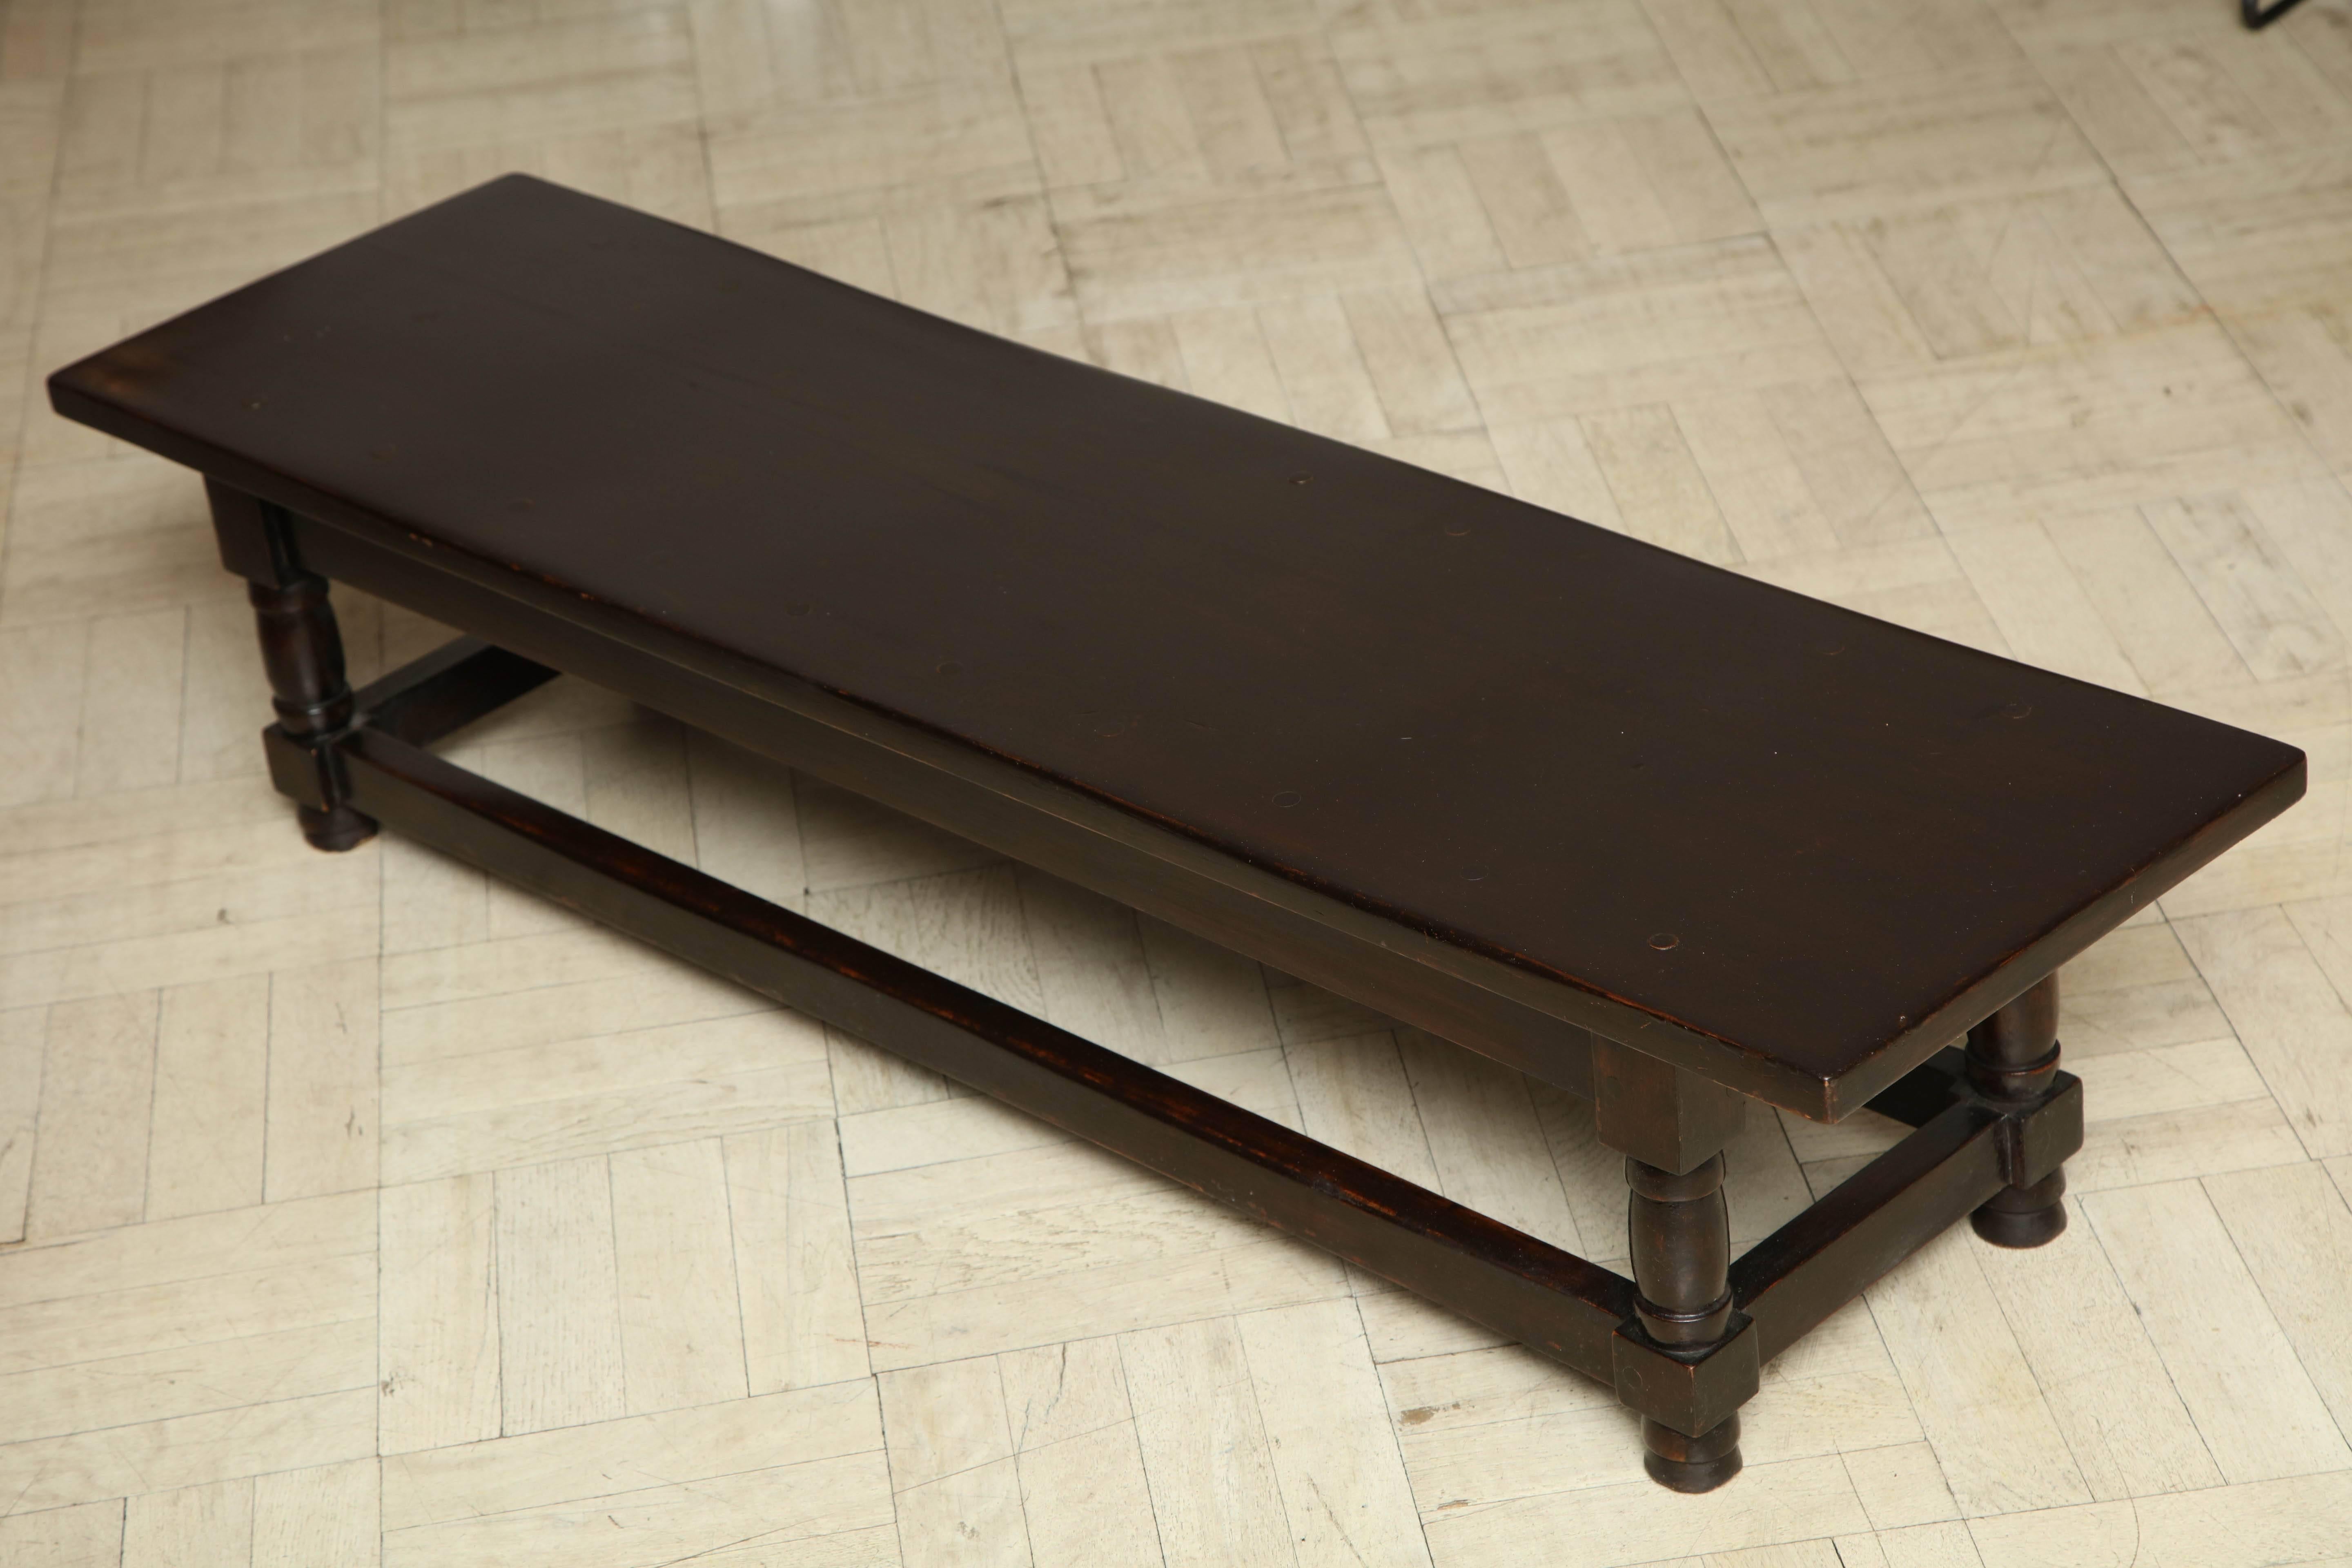 Late 19th century mahogany bench, turned legs with cross stretcher.